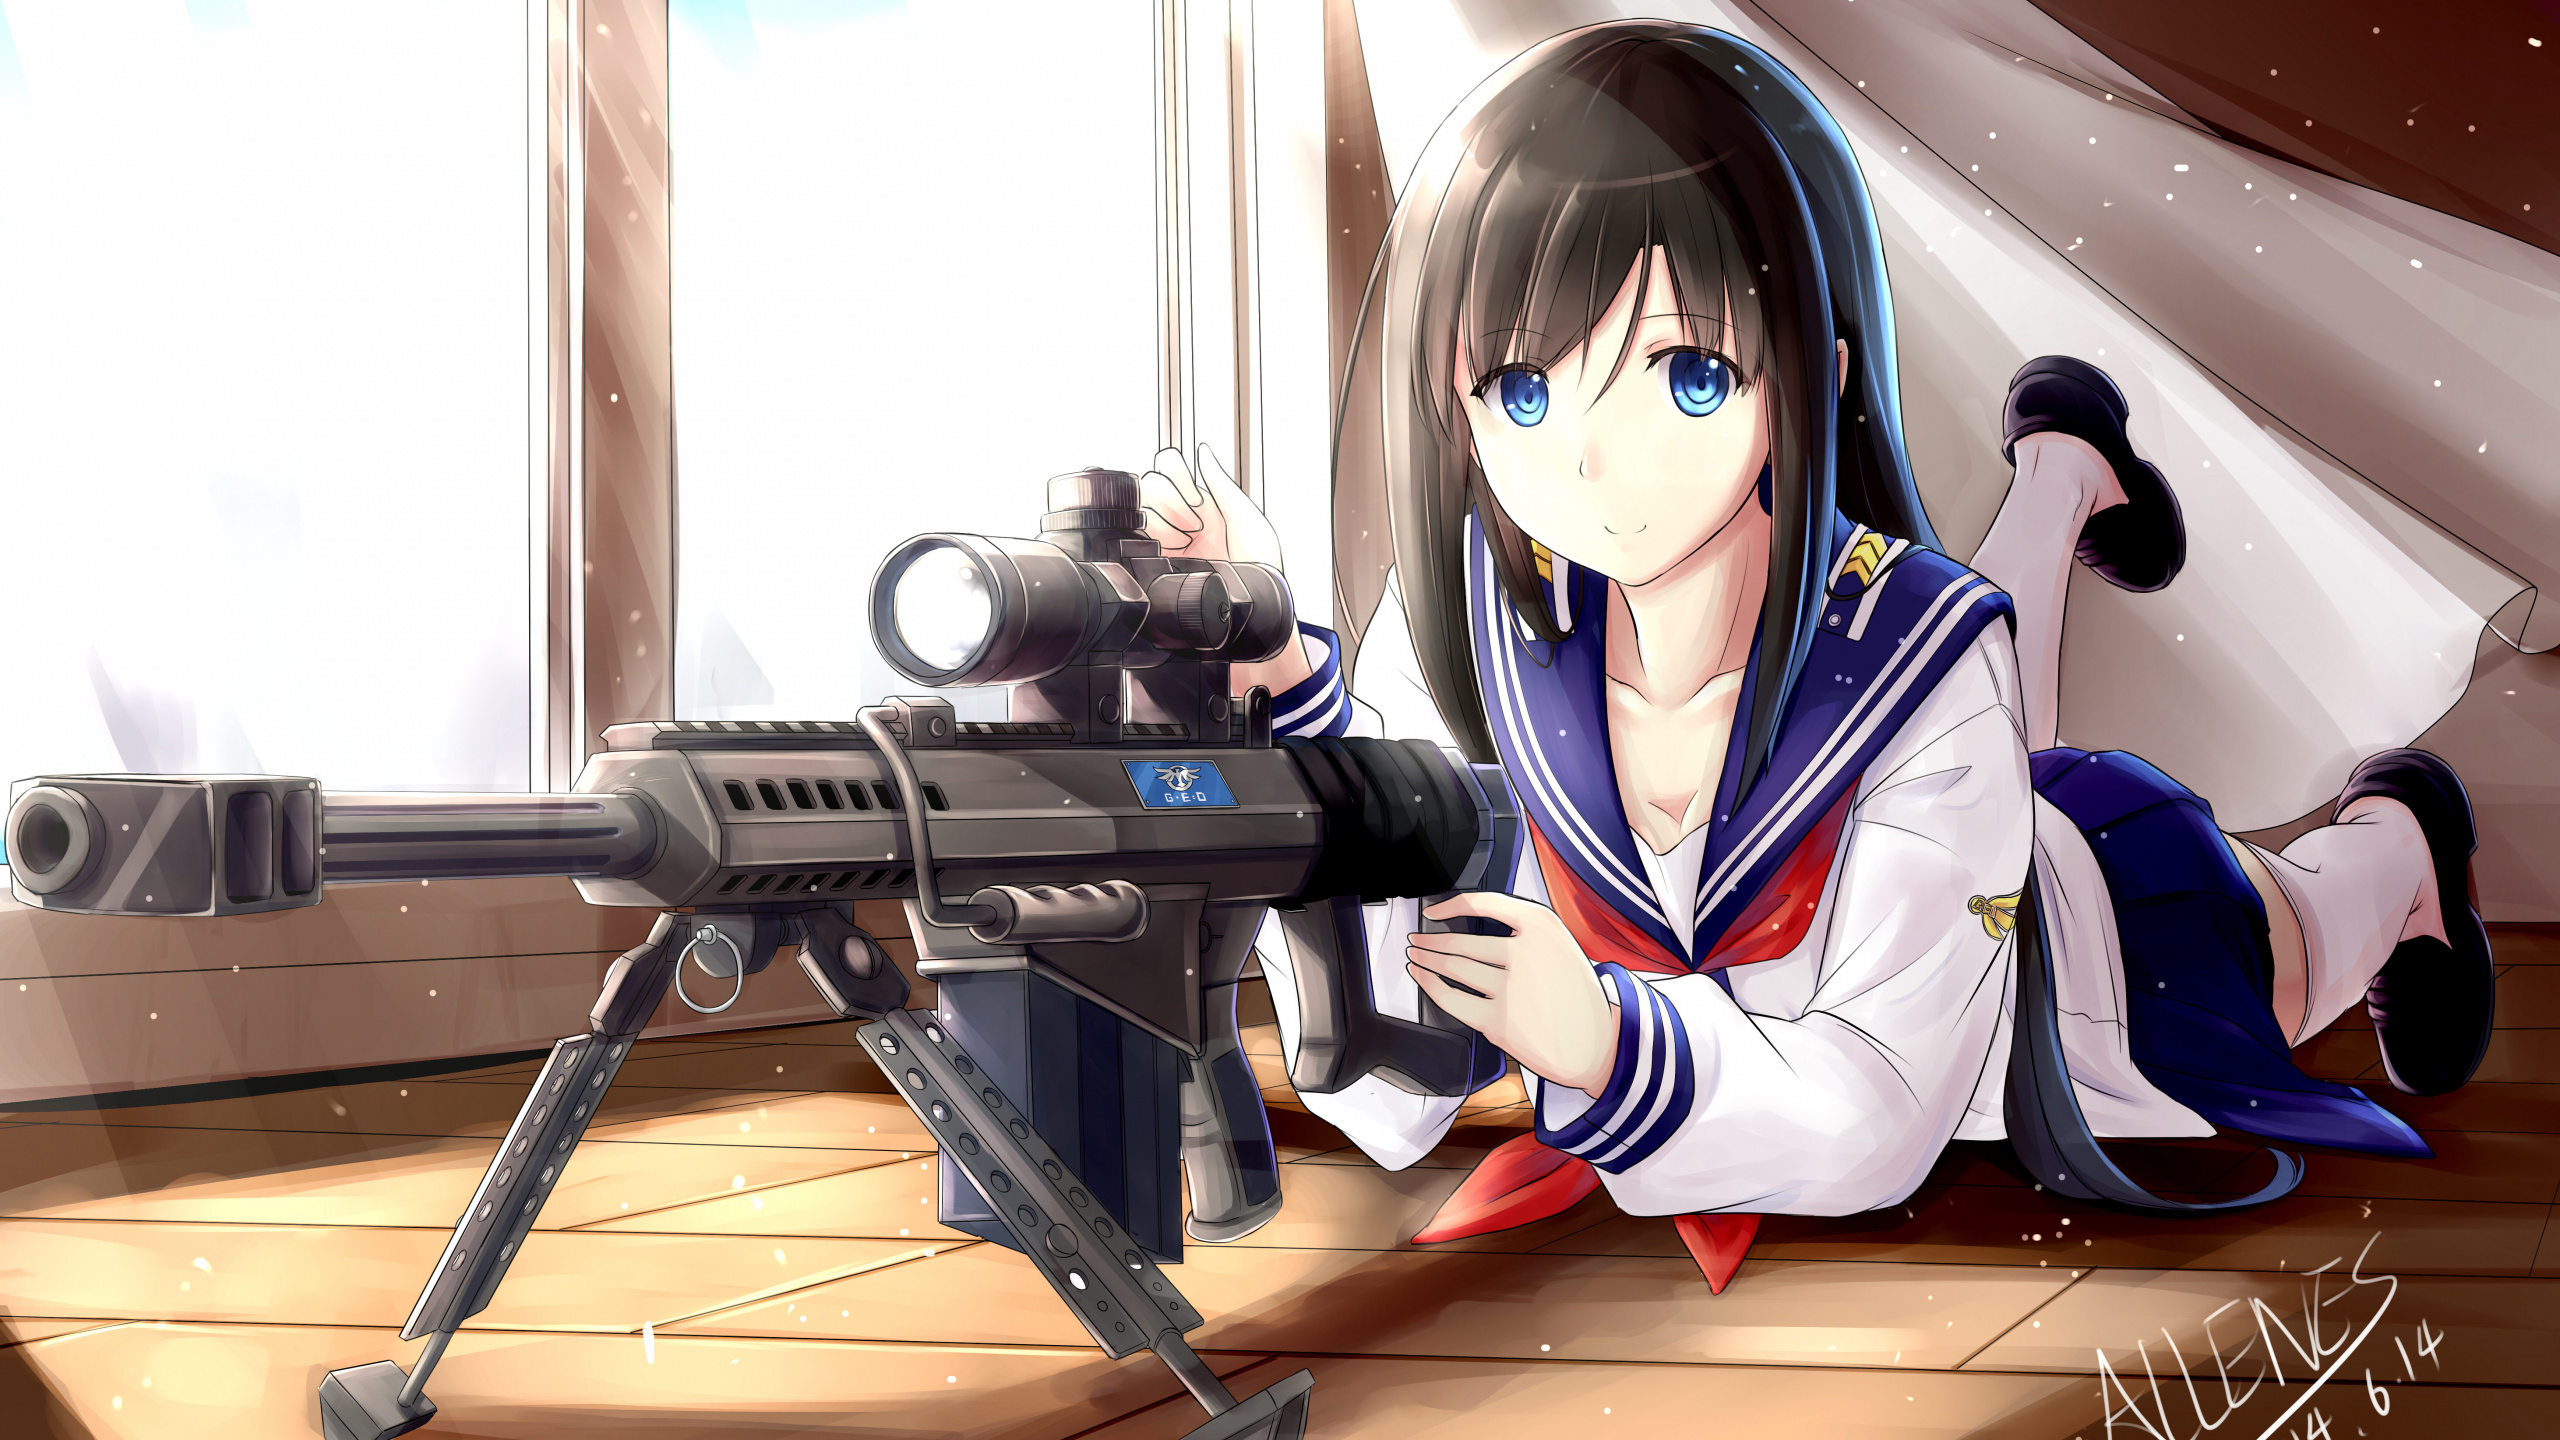 Woman in White and Blue Jacket Holding Black Rifle. Wallpaper in 2560x1440 Resolution